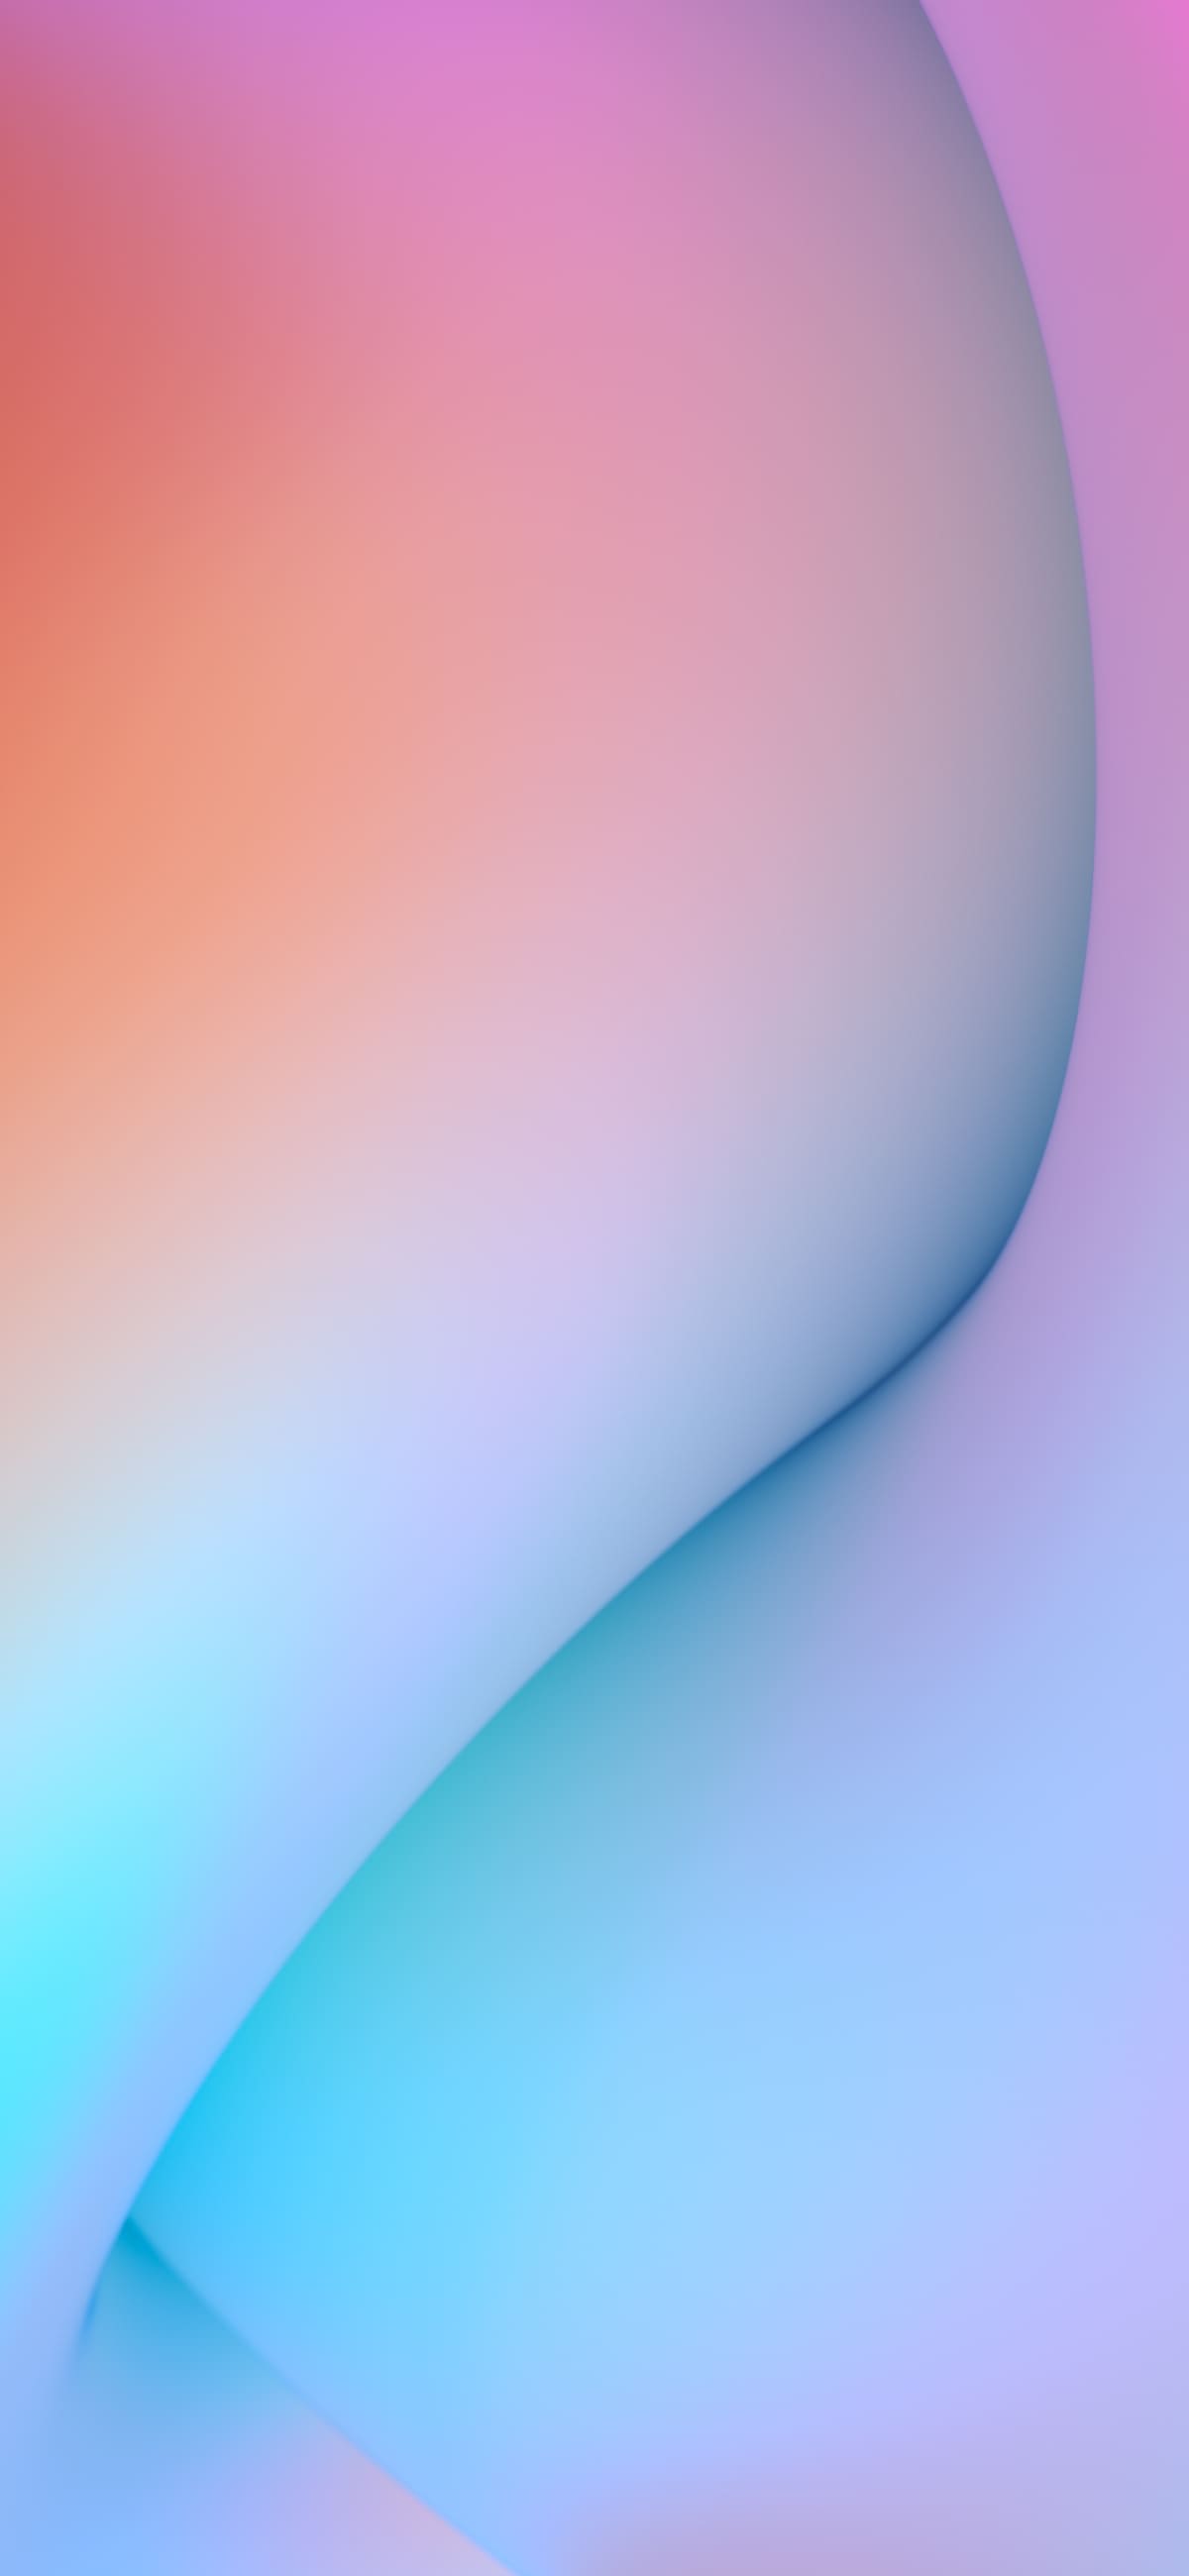 Download iOS 12 Wallpapers (8 Wallpapers) | DroidViews